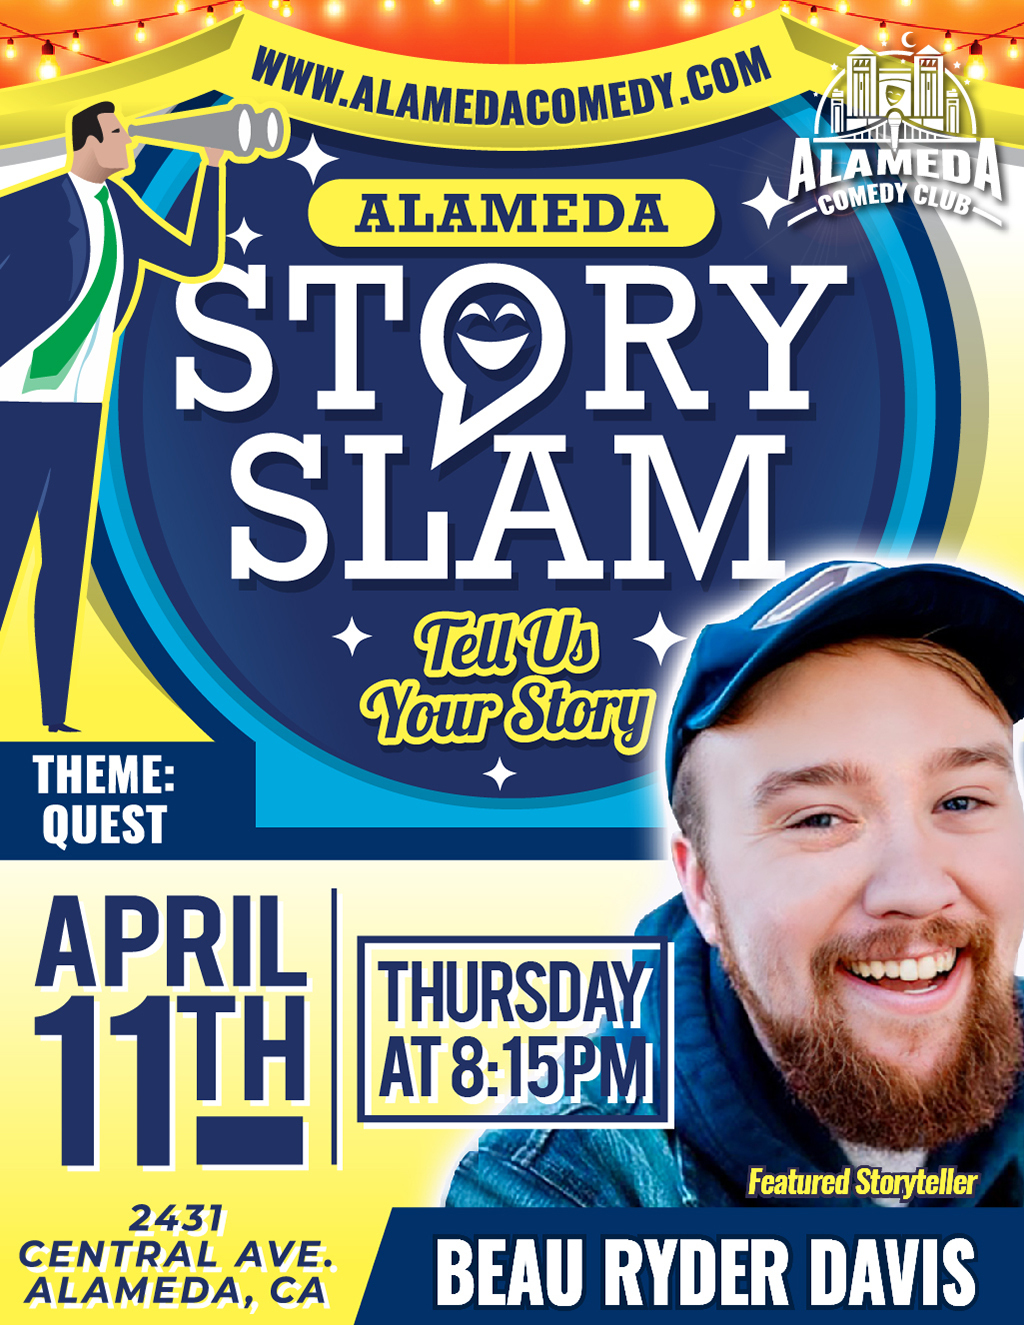 Alameda Comedy Club Alameda Comedy Story Slam  Your Chance to Share Your Quest promotion flier on Digifli com